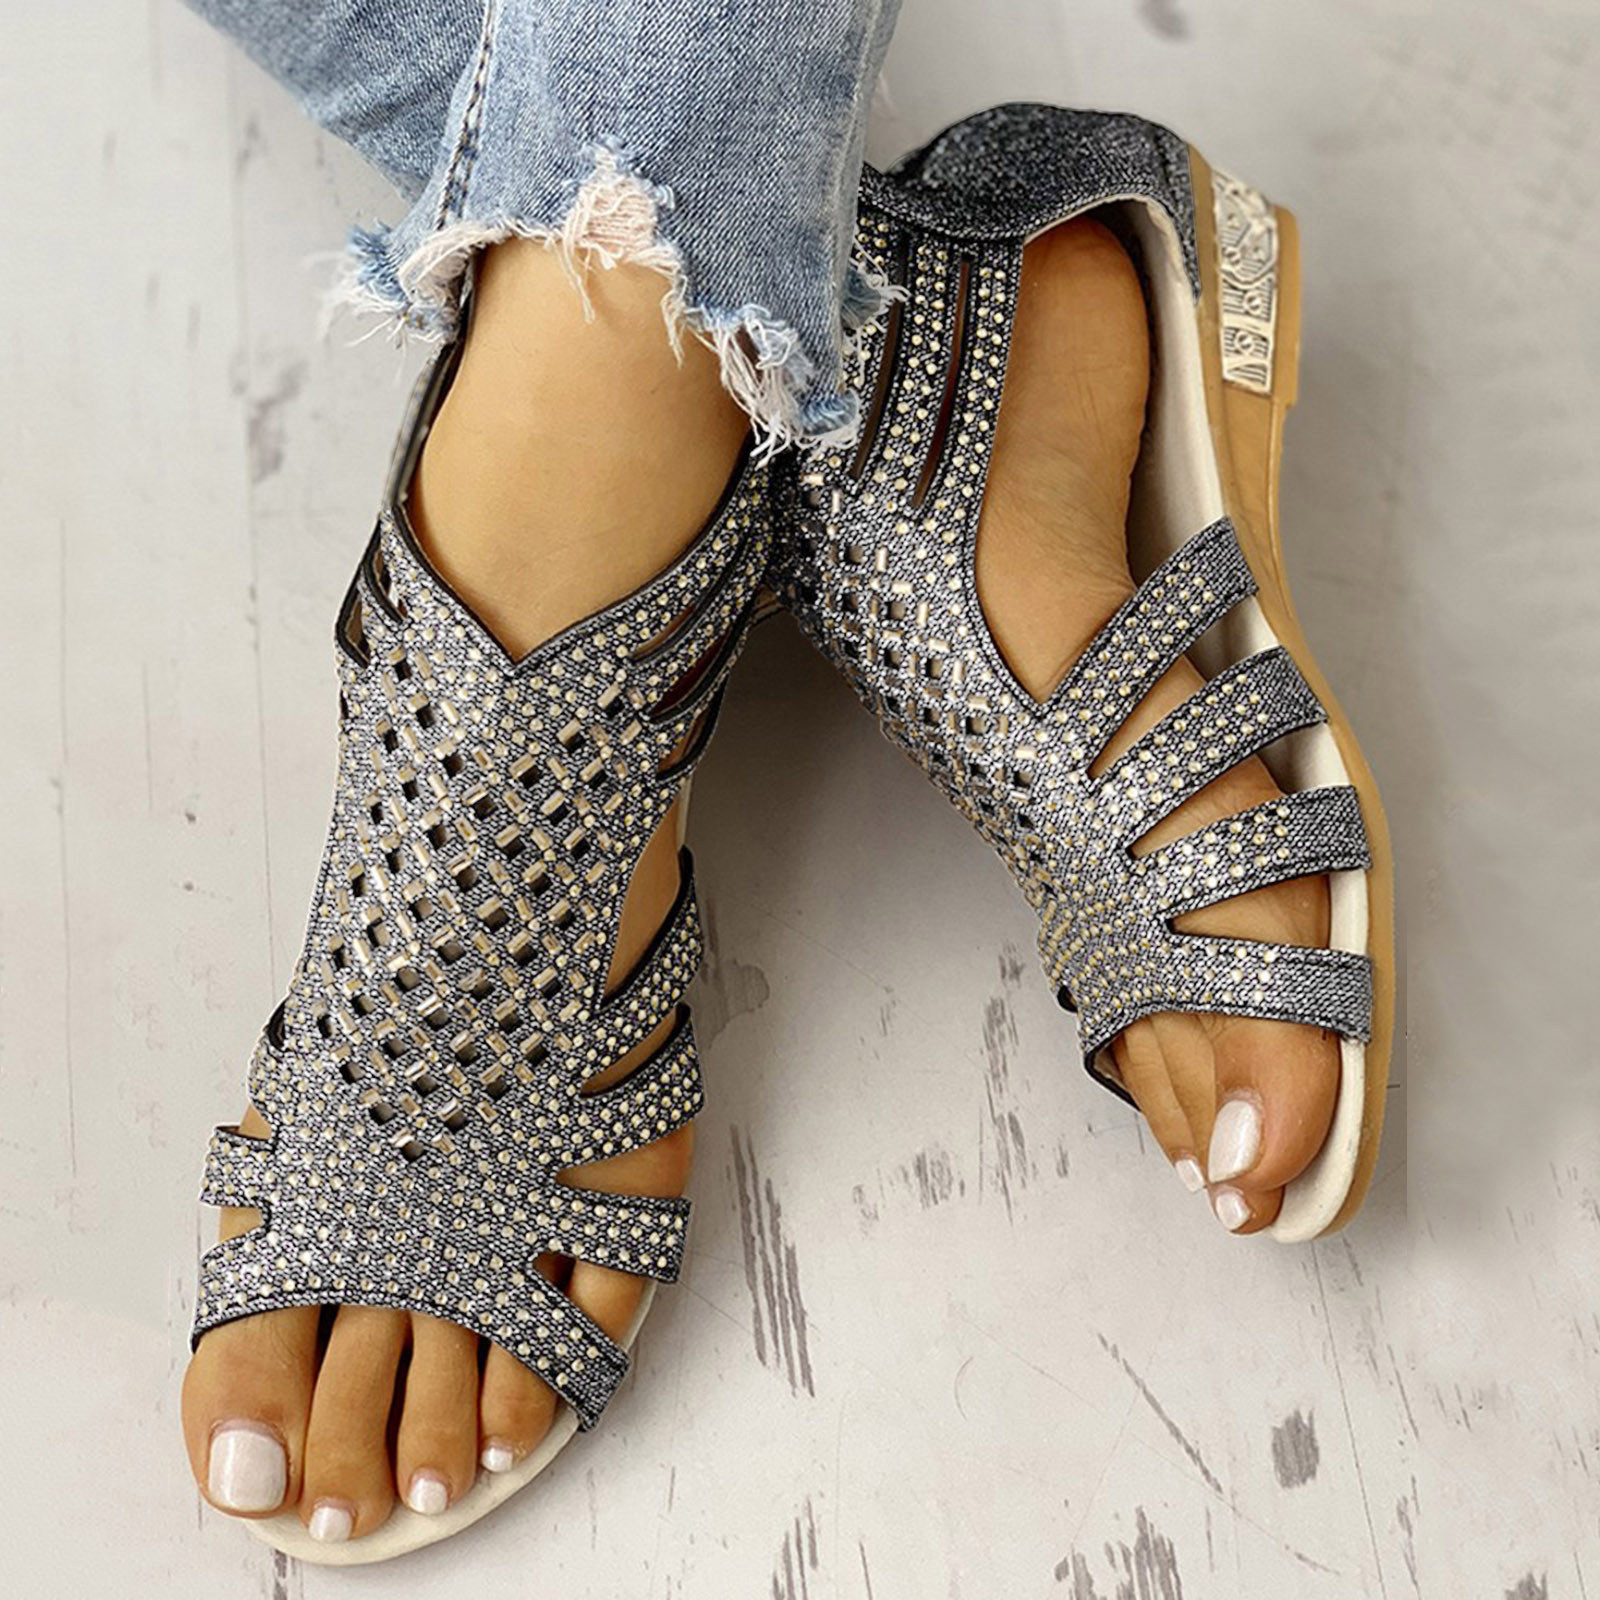 Buy Knee High Gladiator Sandals. White Lace up Sandals With Boho Chic  Interchangeable Laces. Vegan Too. Online in India - Etsy